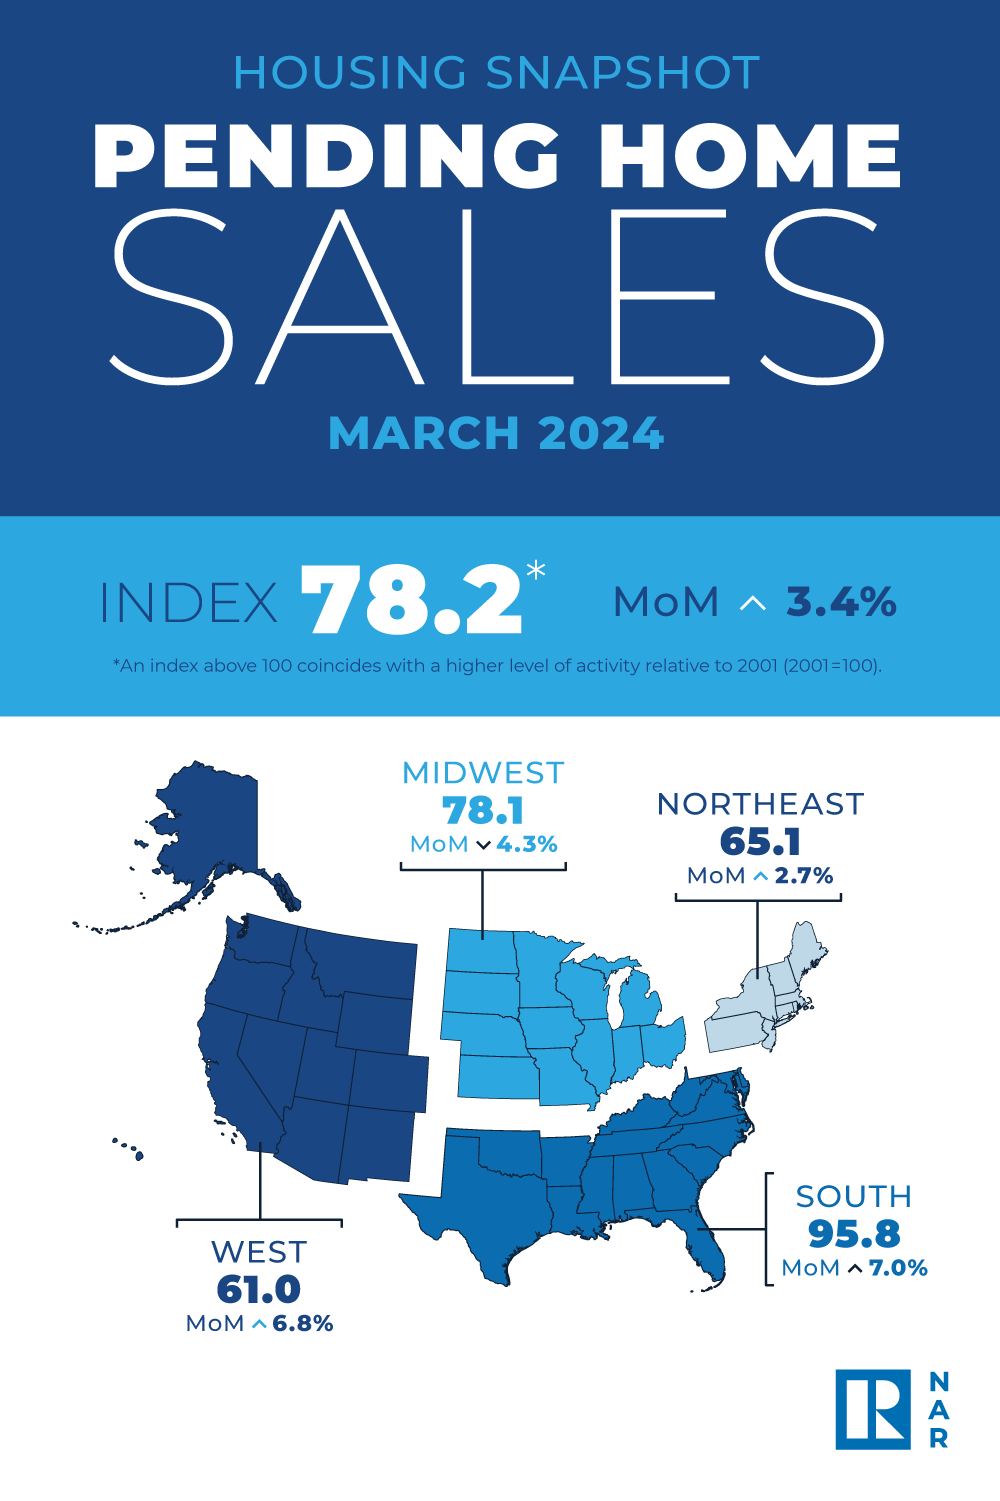 Pending Home Sales Snapshot Infographic, March 2024